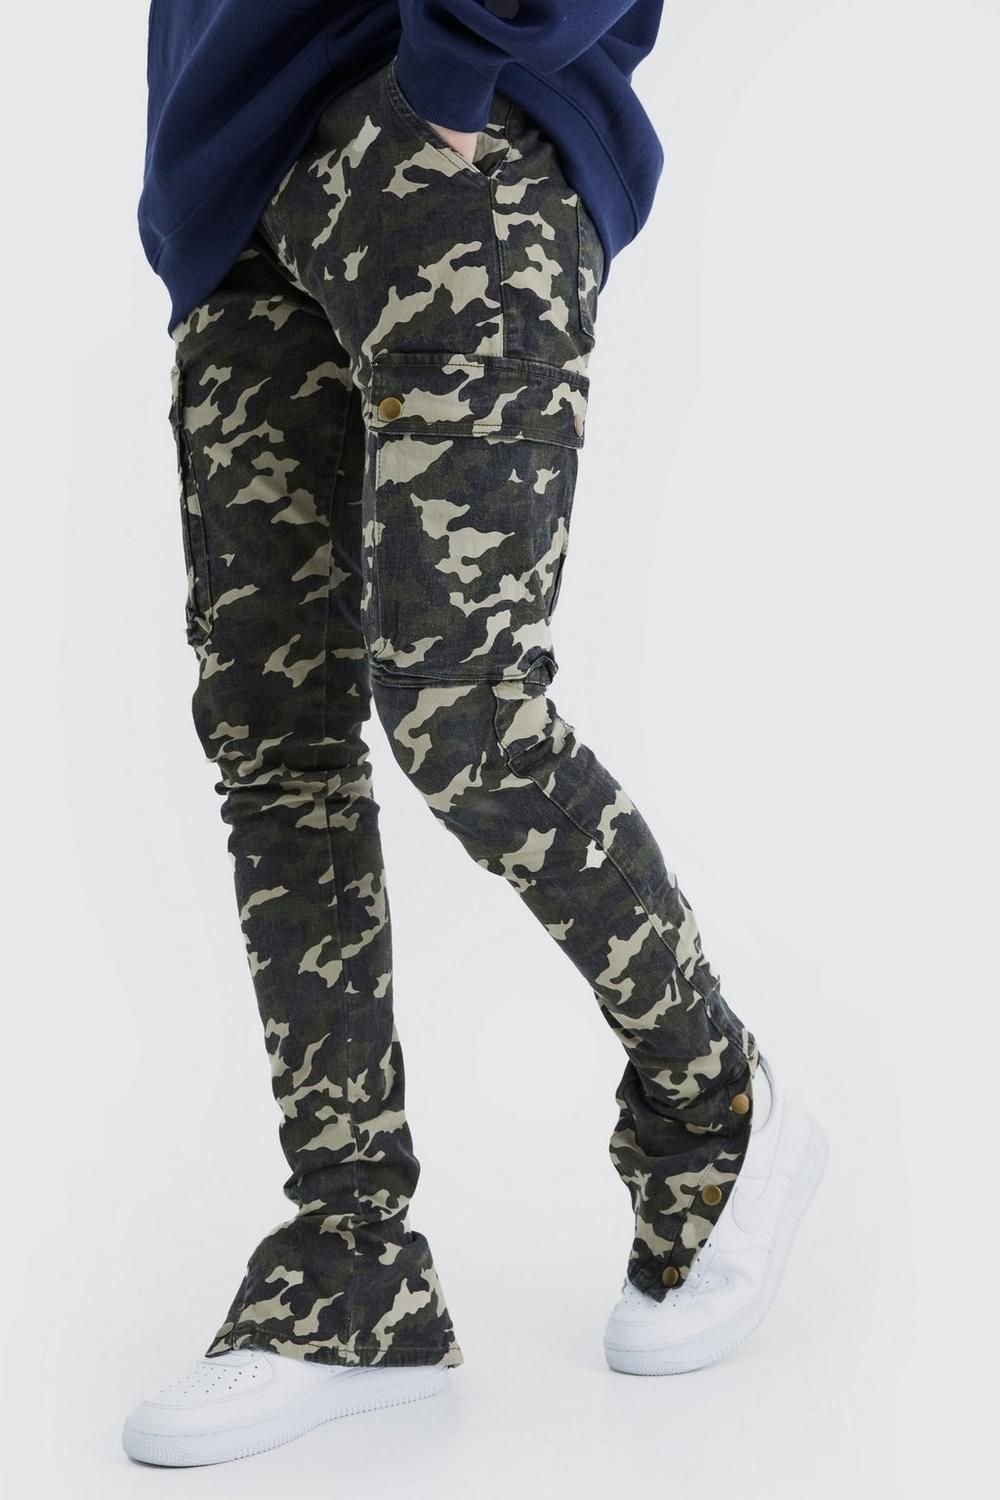 COMING SOON! Camouflage Skinny Cargo Pants